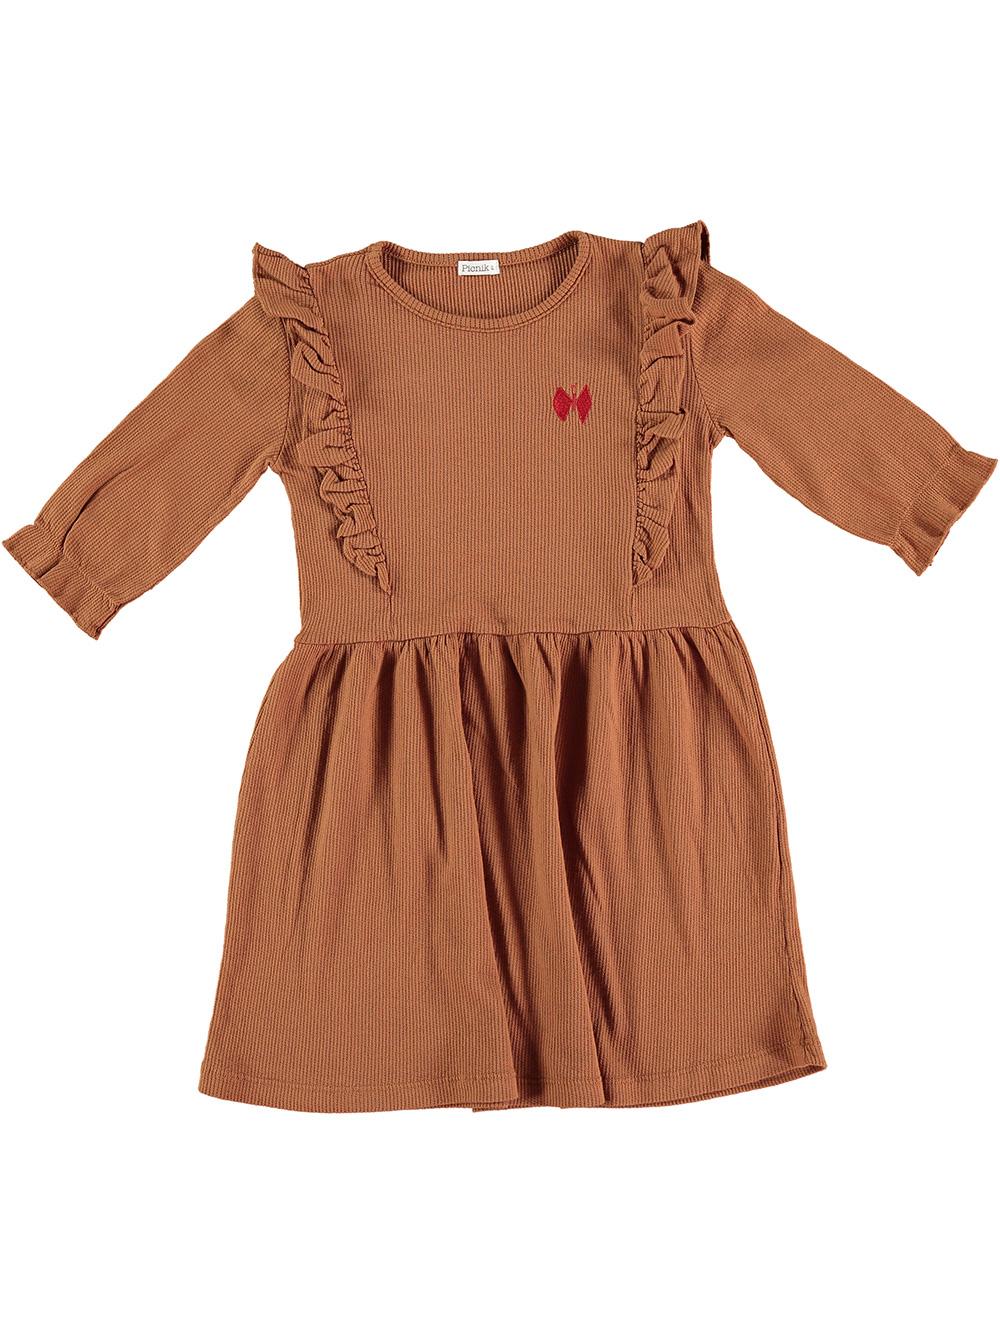 BROWN BUTTERFLY EMBROIDERED THREE-QUARTER SLEEVE DRESS